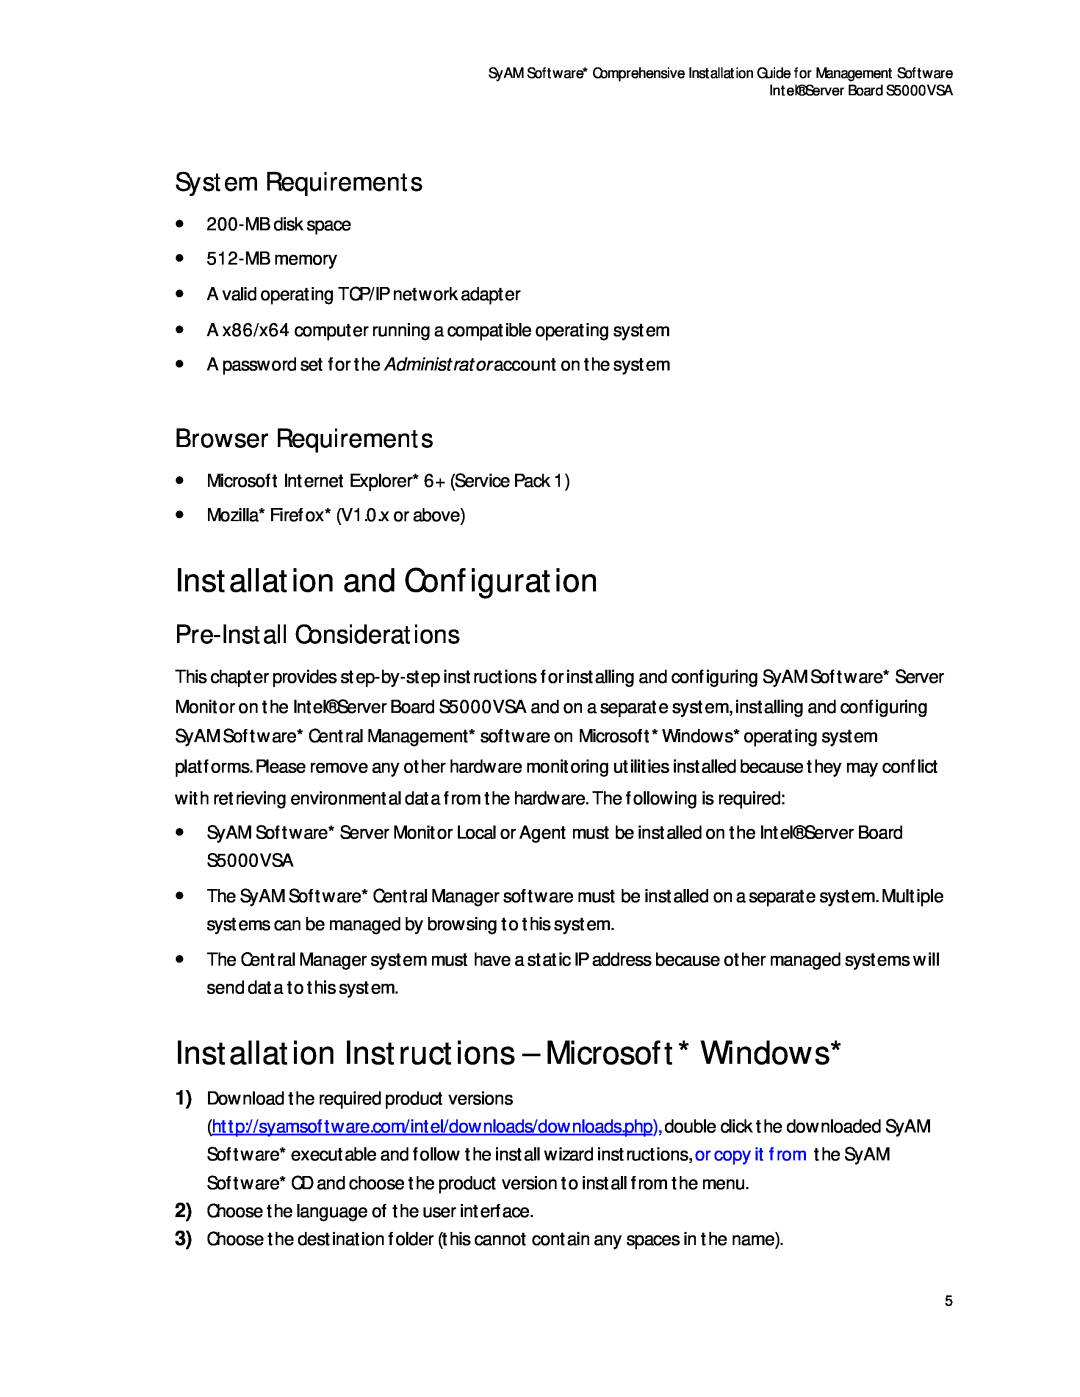 Intel S5000VSA manual Installation and Configuration, Installation Instructions - Microsoft* Windows, System Requirements 